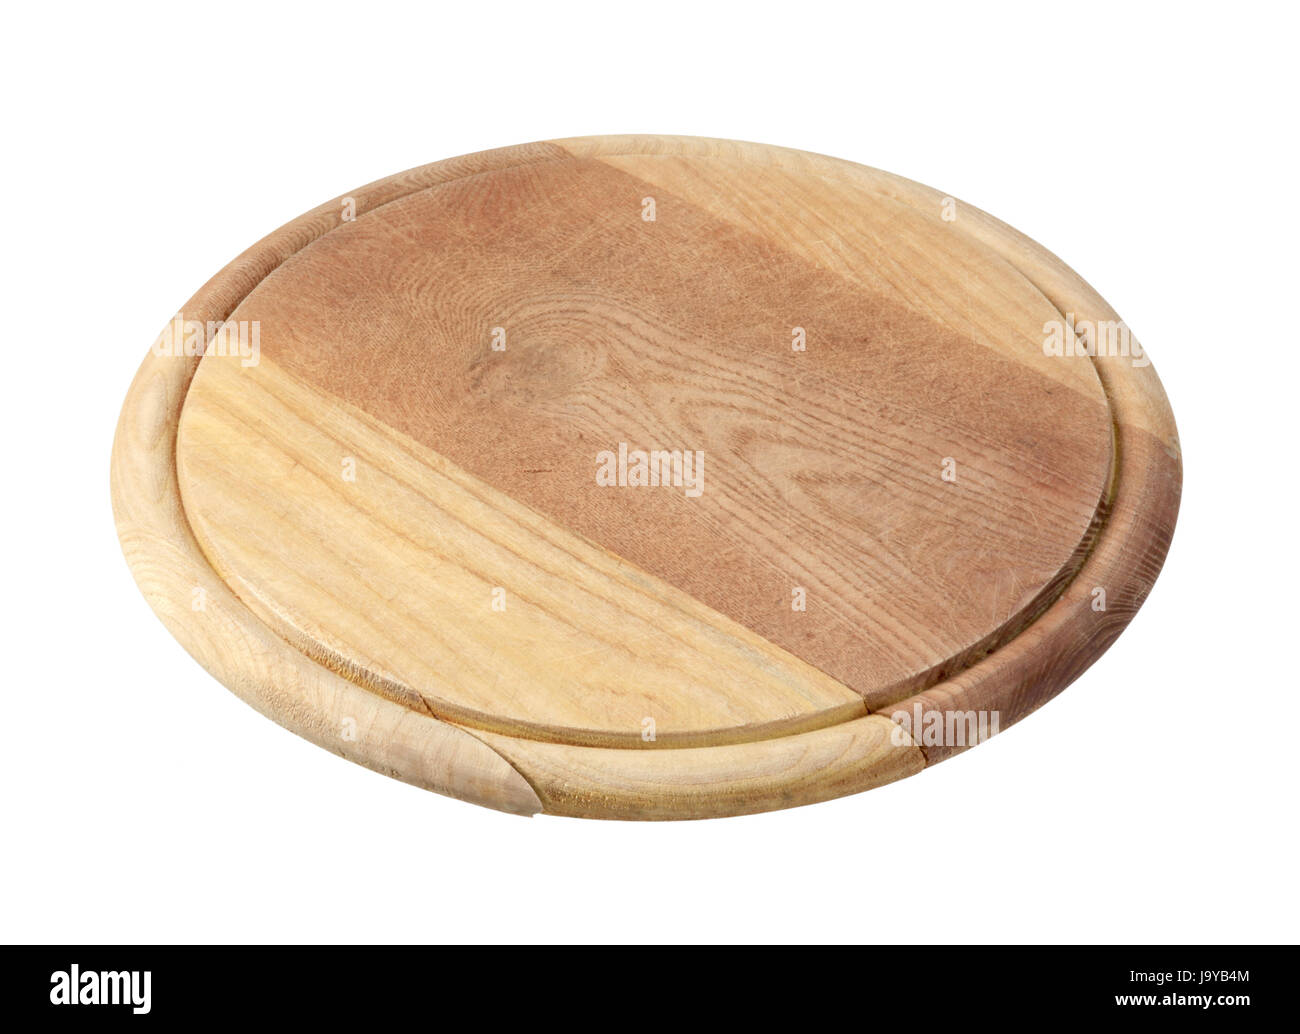 object, isolated, one, smooth, wooden, cutout, breadboard, cutting board, Stock Photo